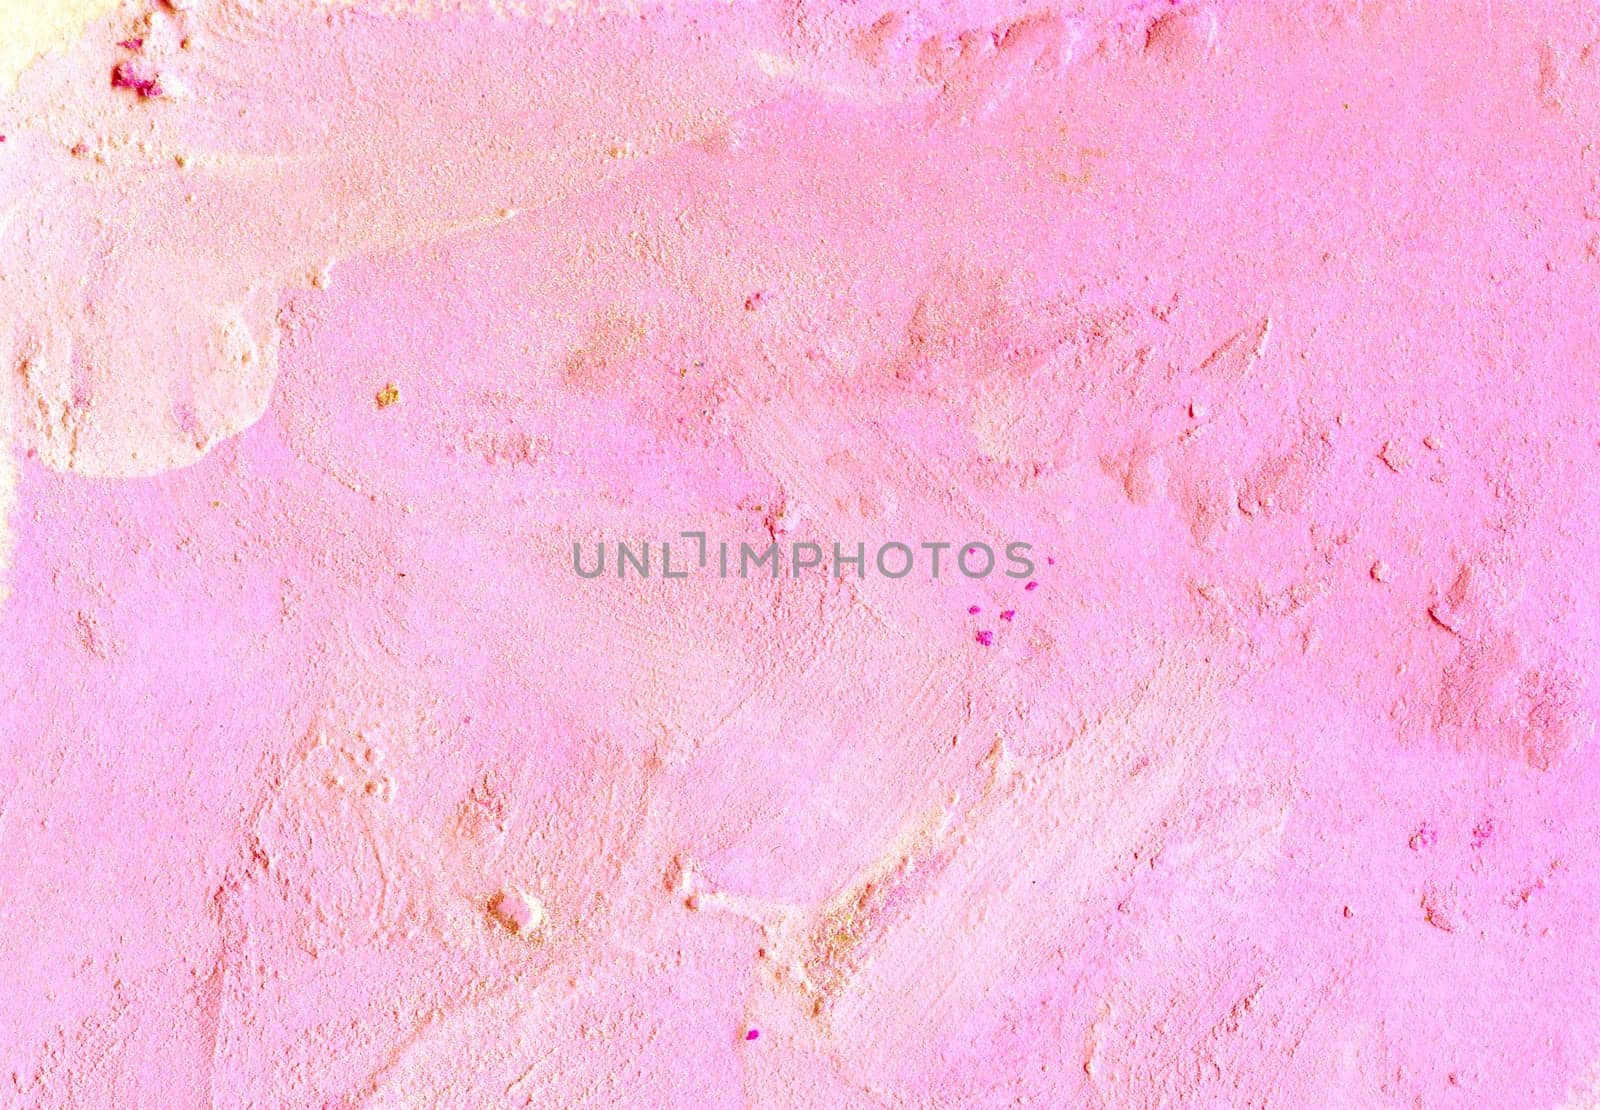 Pink abstract hand painted background by Dustick